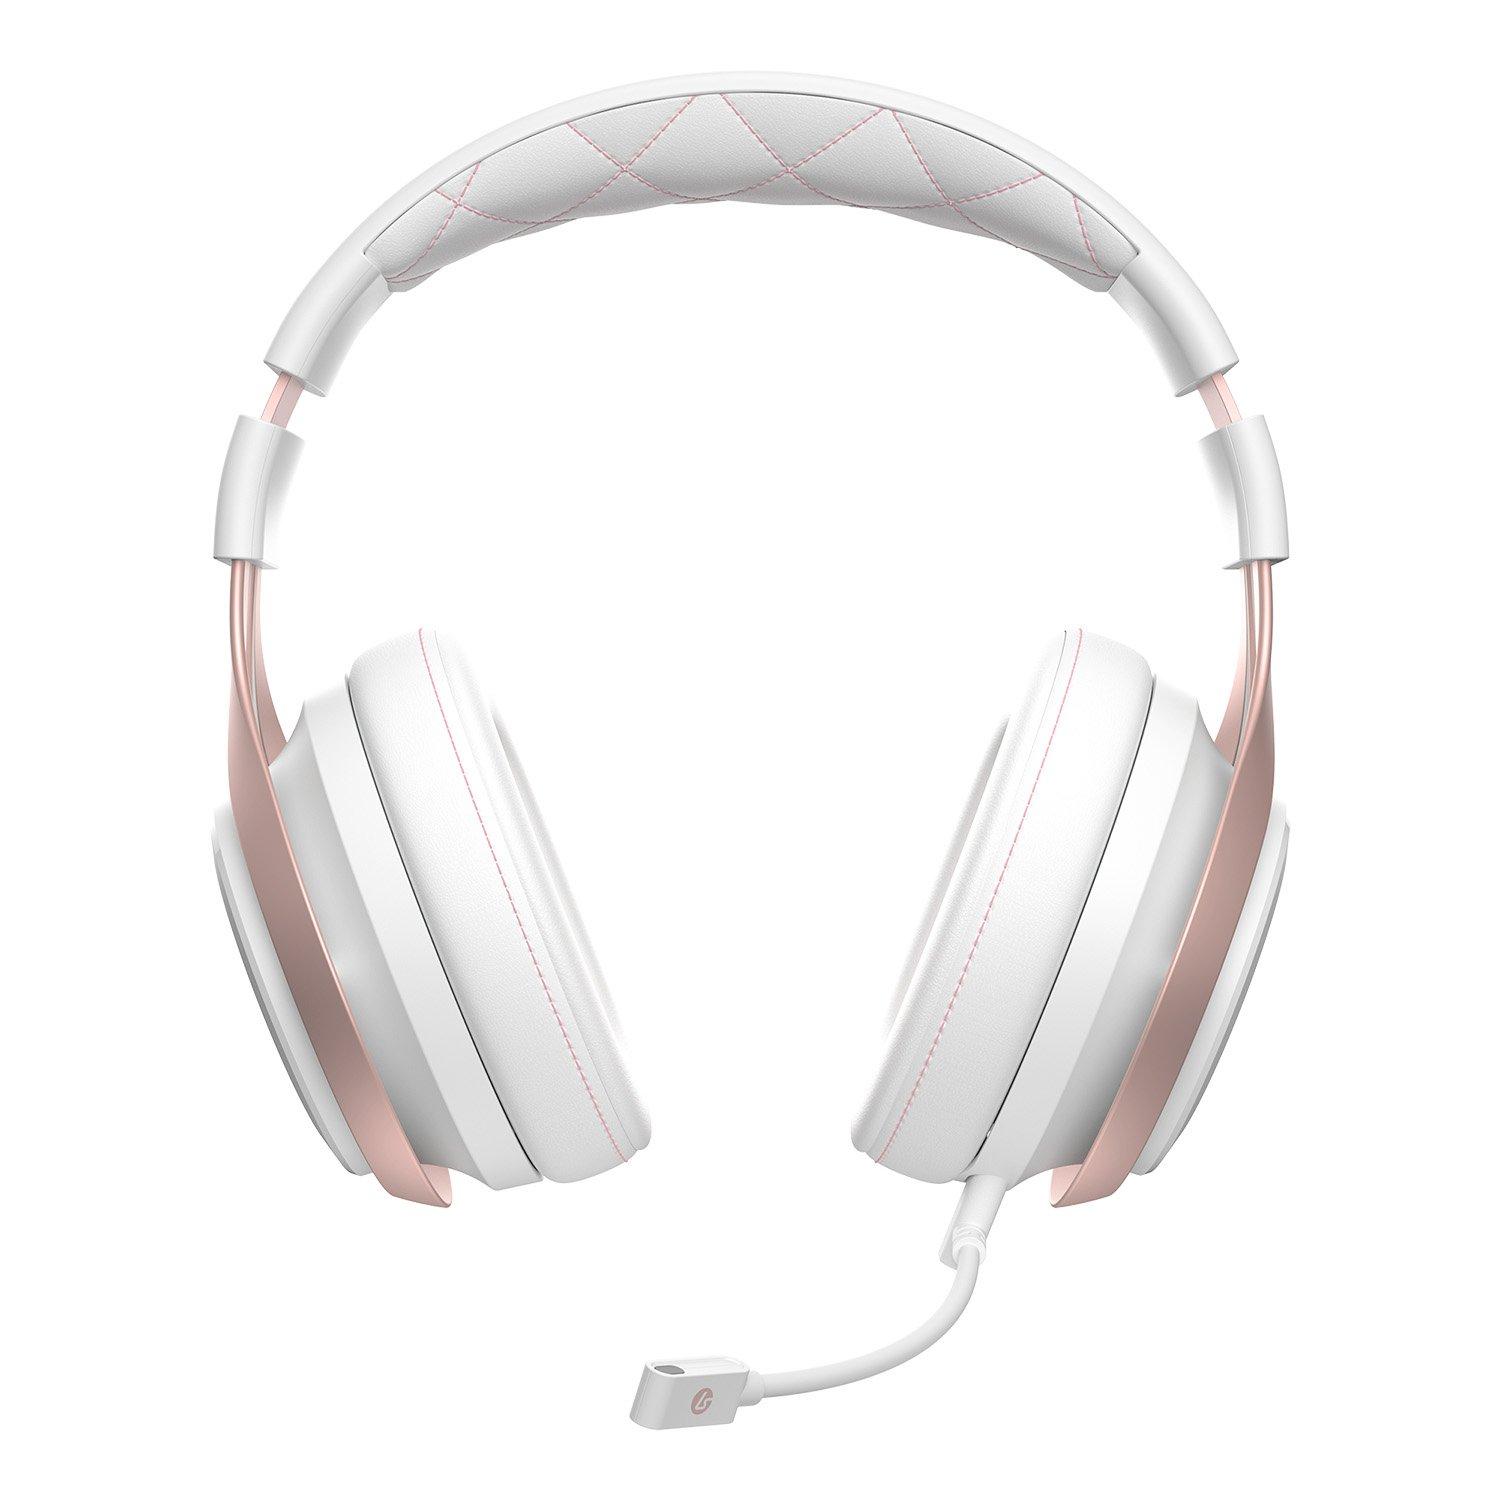 Lucid Sound LS35X Wireless Stereo Gaming Headset Rose Gold